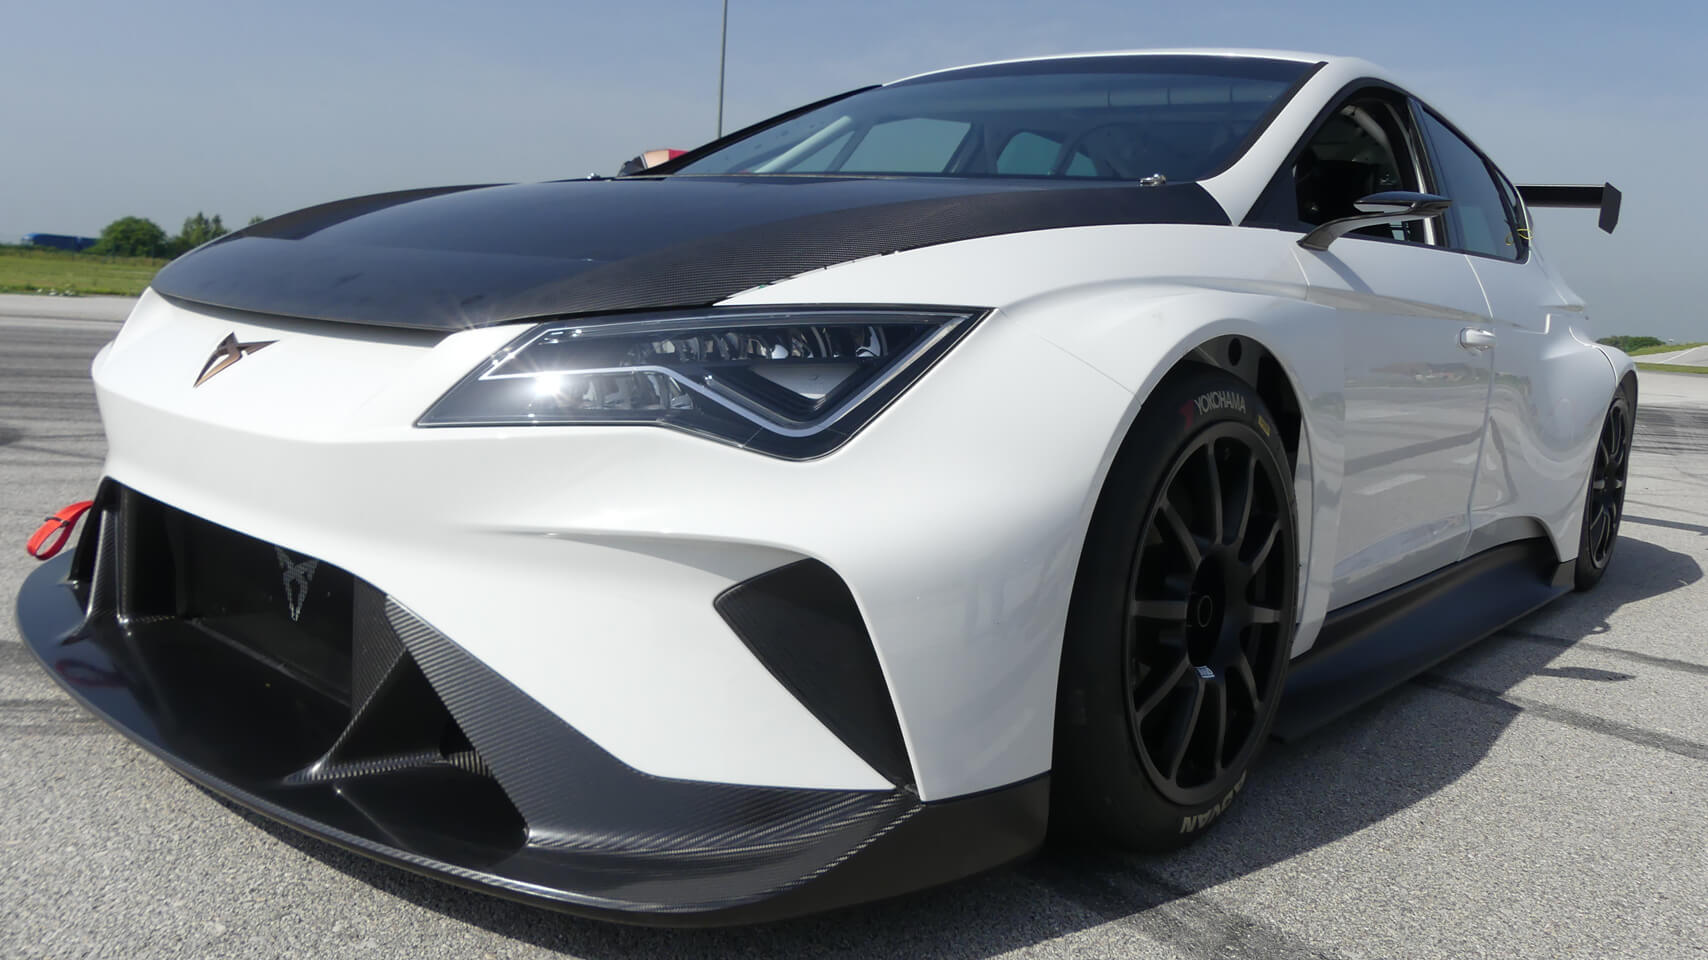 Touring electric sports car CUPRA e-Racer has first track